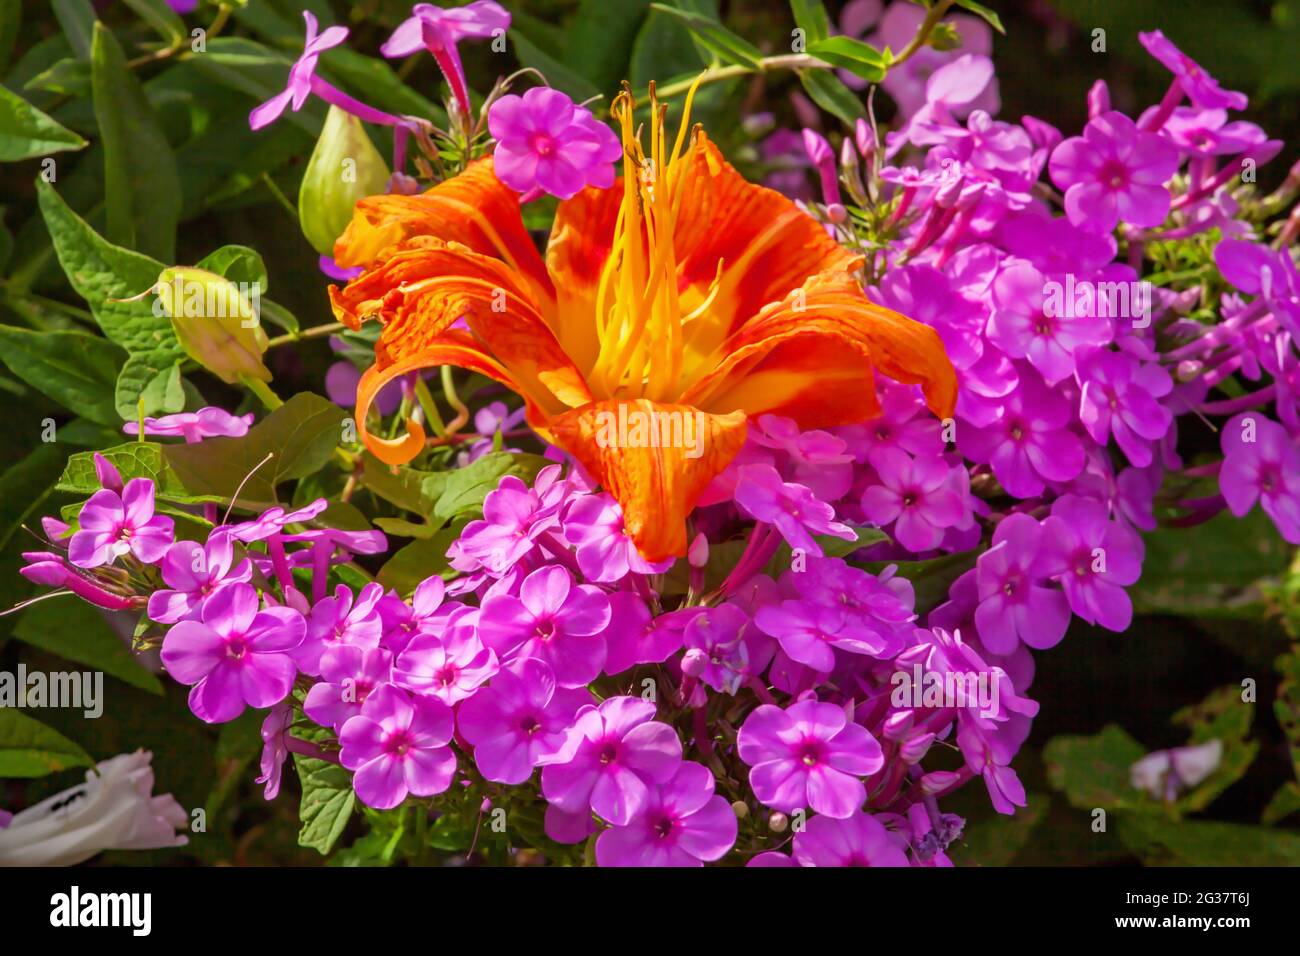 'Kwanzo' Day-lily and Garden Phlox growing together in a summer garden in Pennsylvania Stock Photo